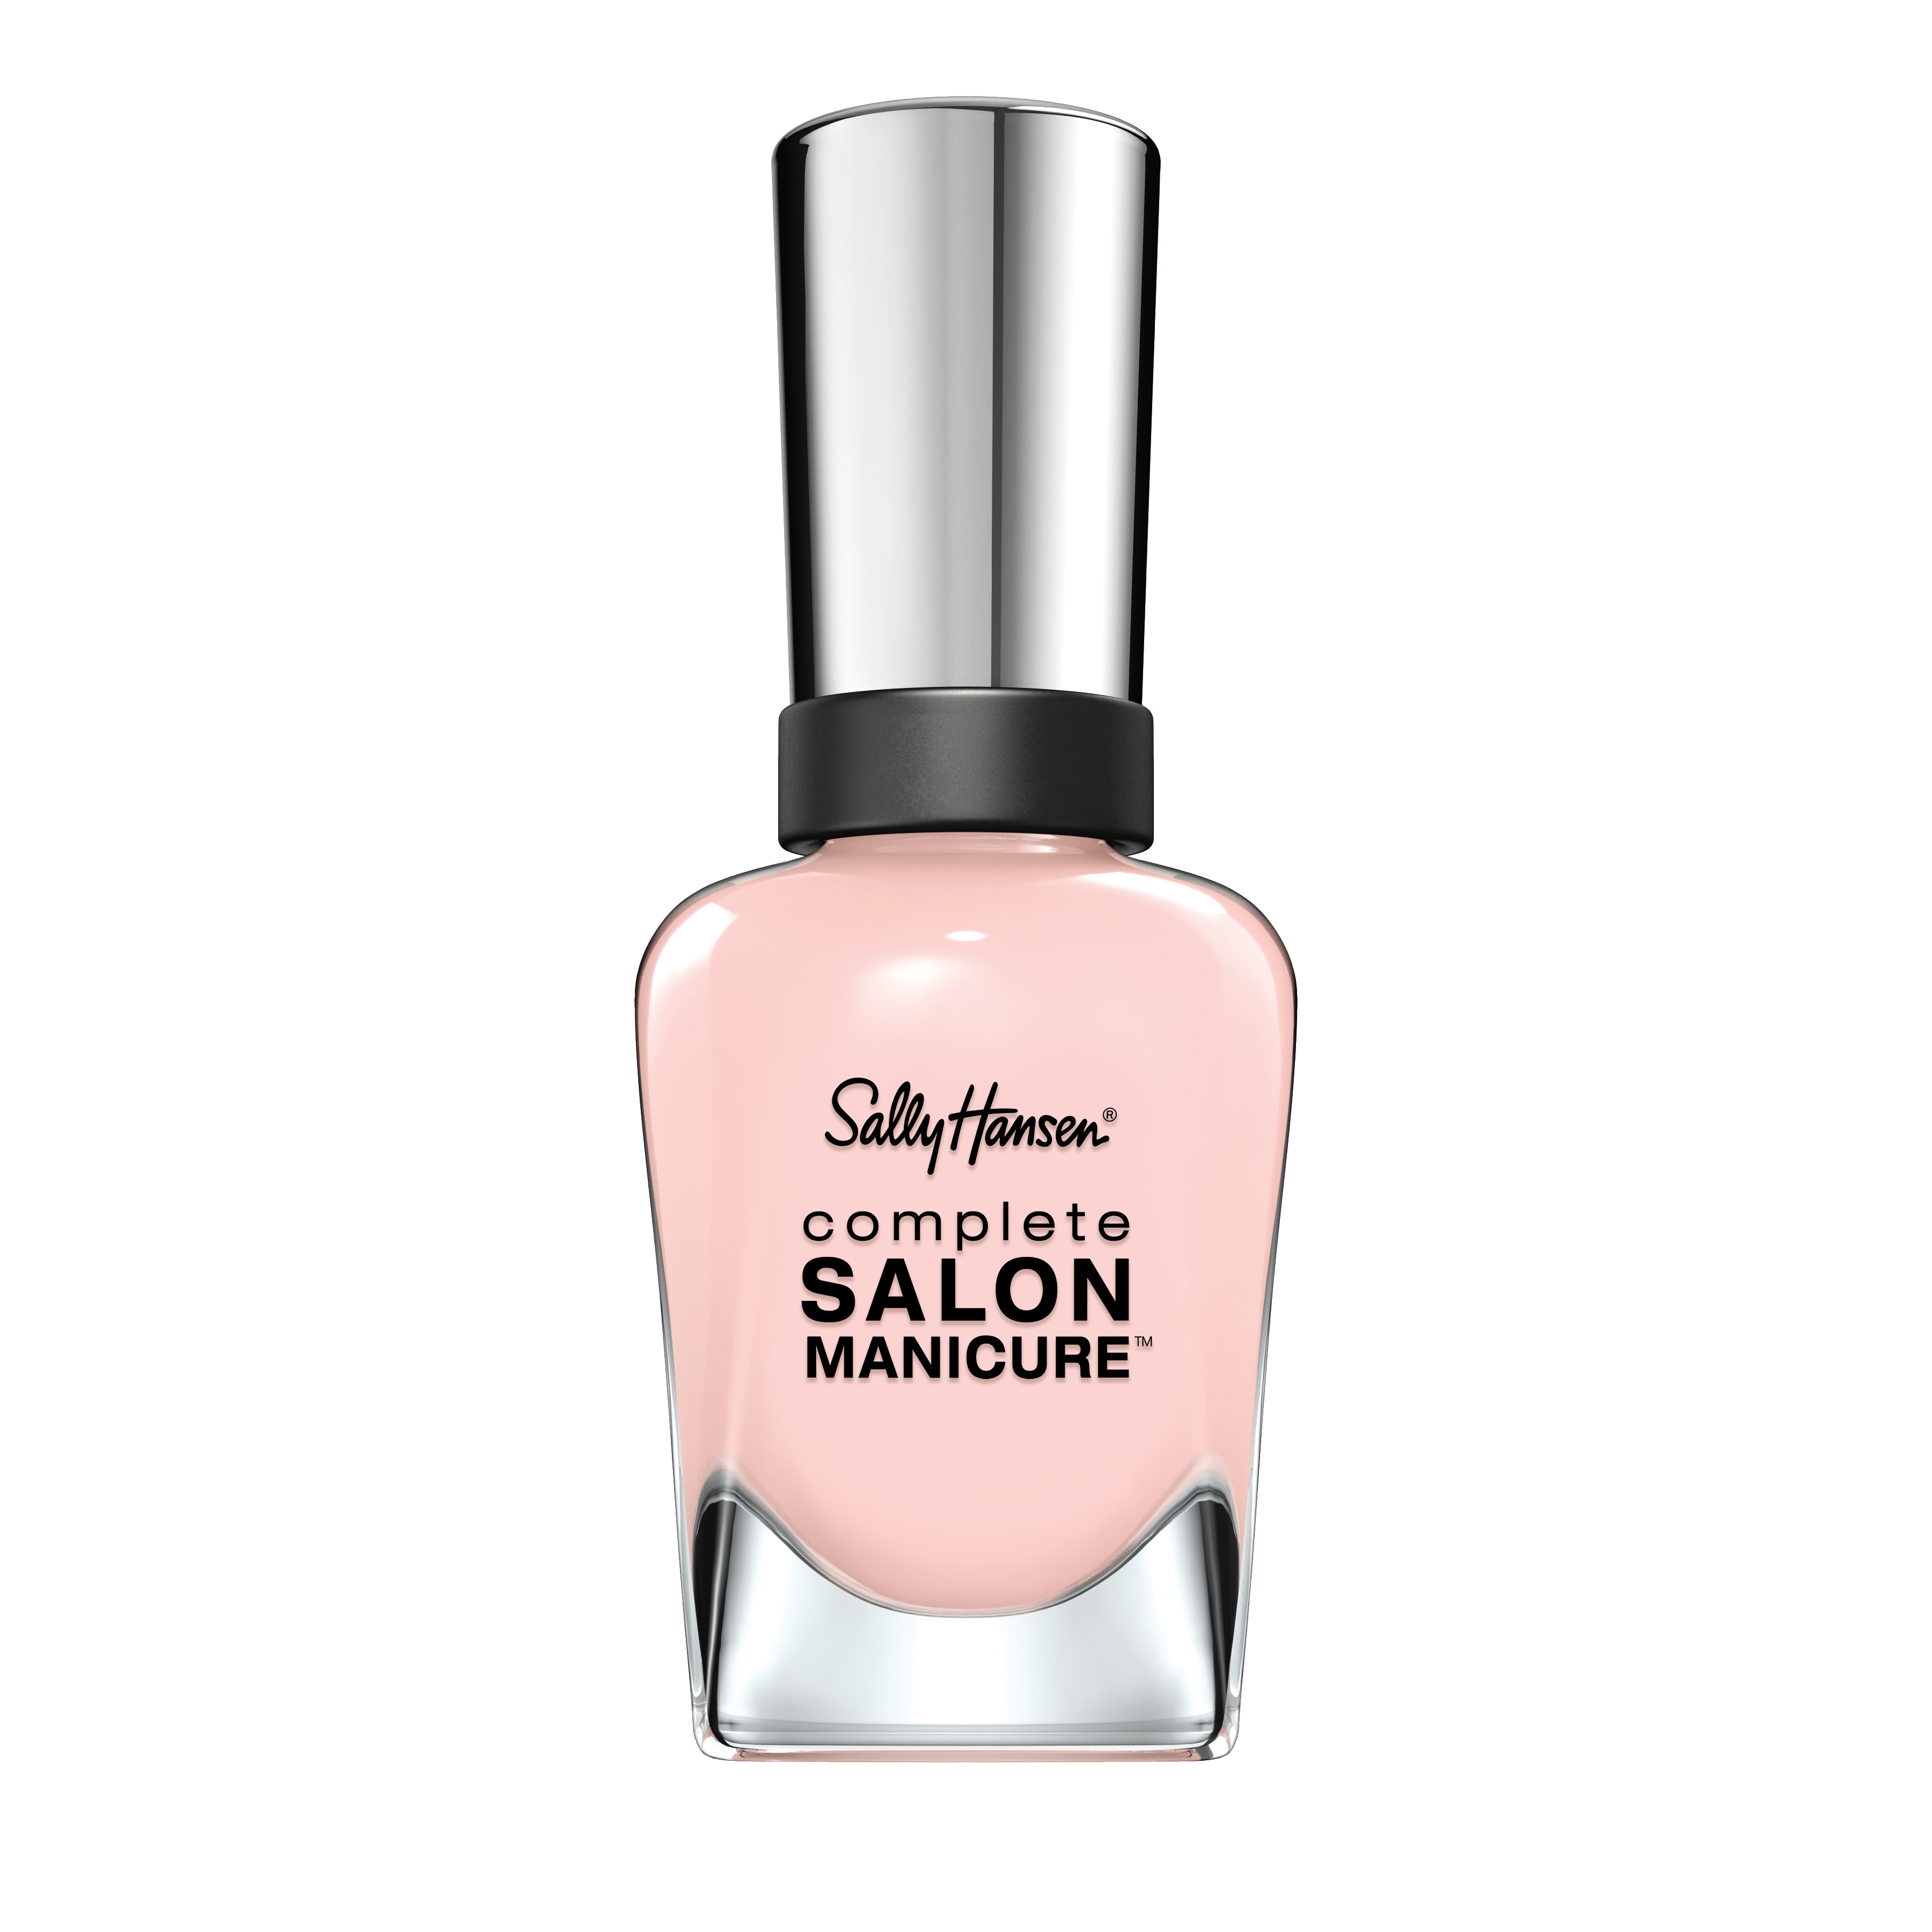 Sally Hansen Complete Salon Manicure Nail Color, Sweet Talker - image 1 of 3